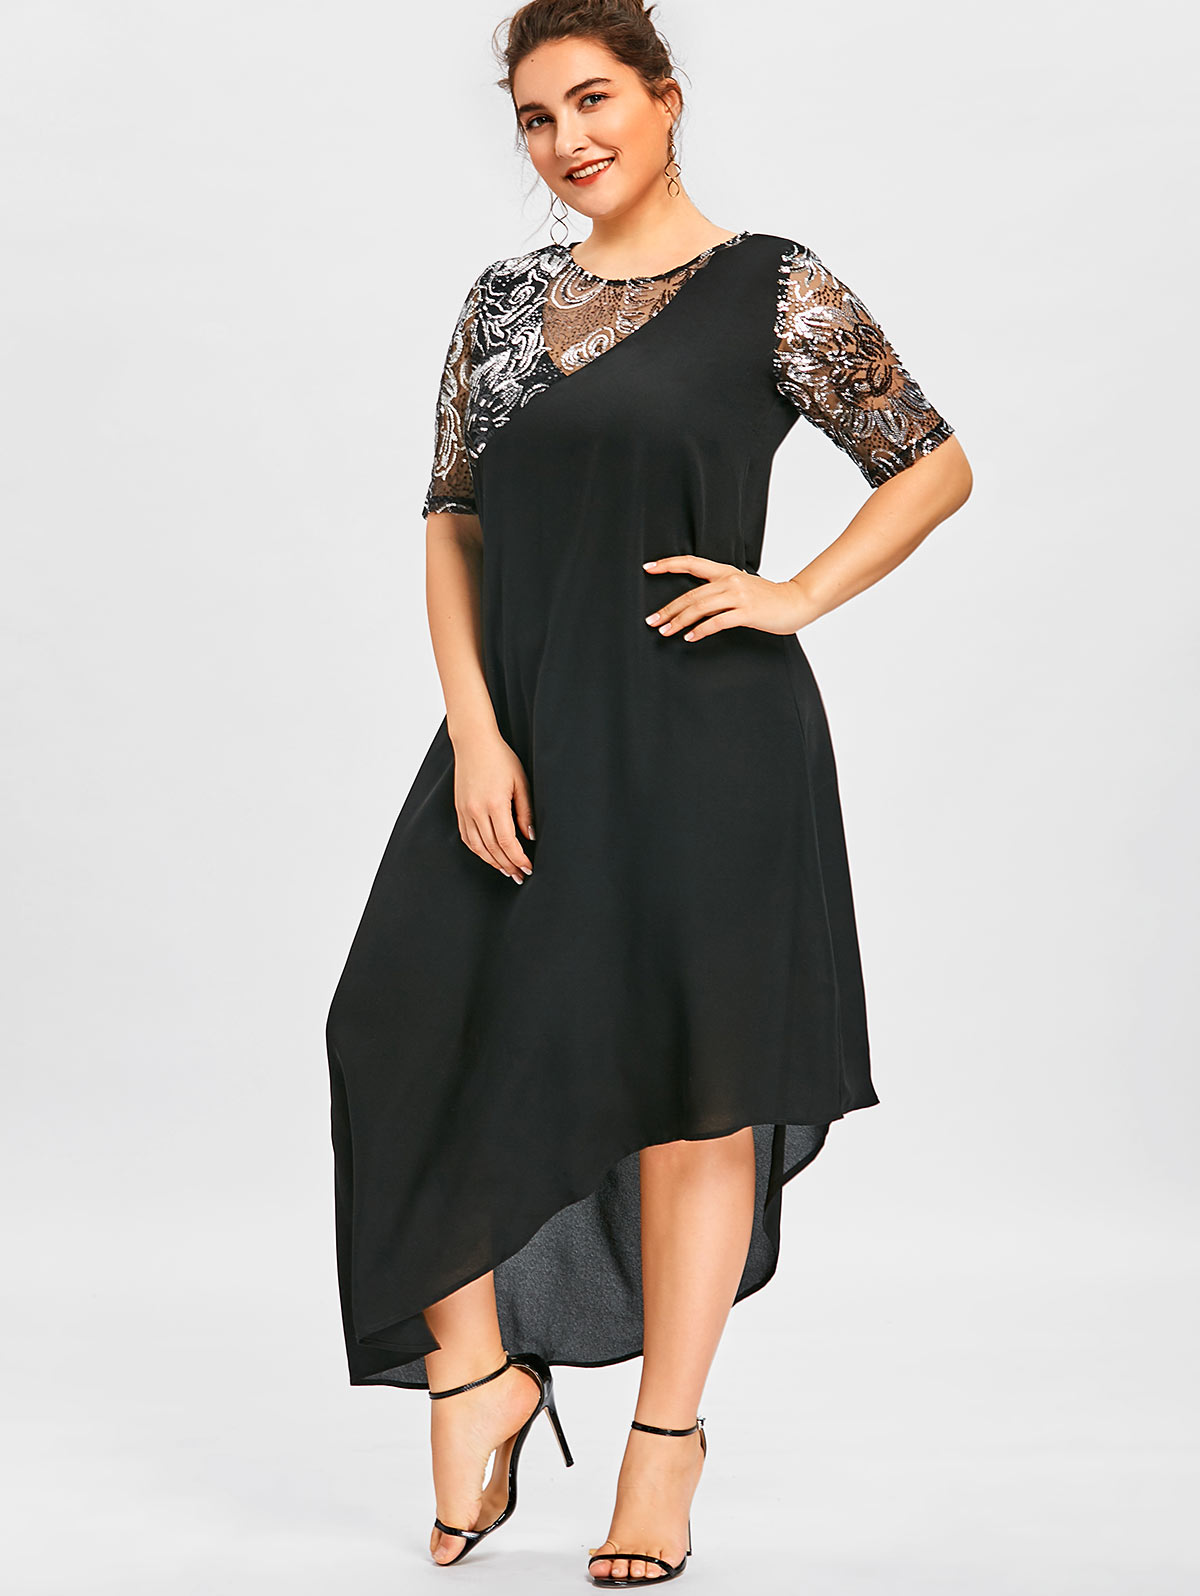 black sparkly dress with sleeves